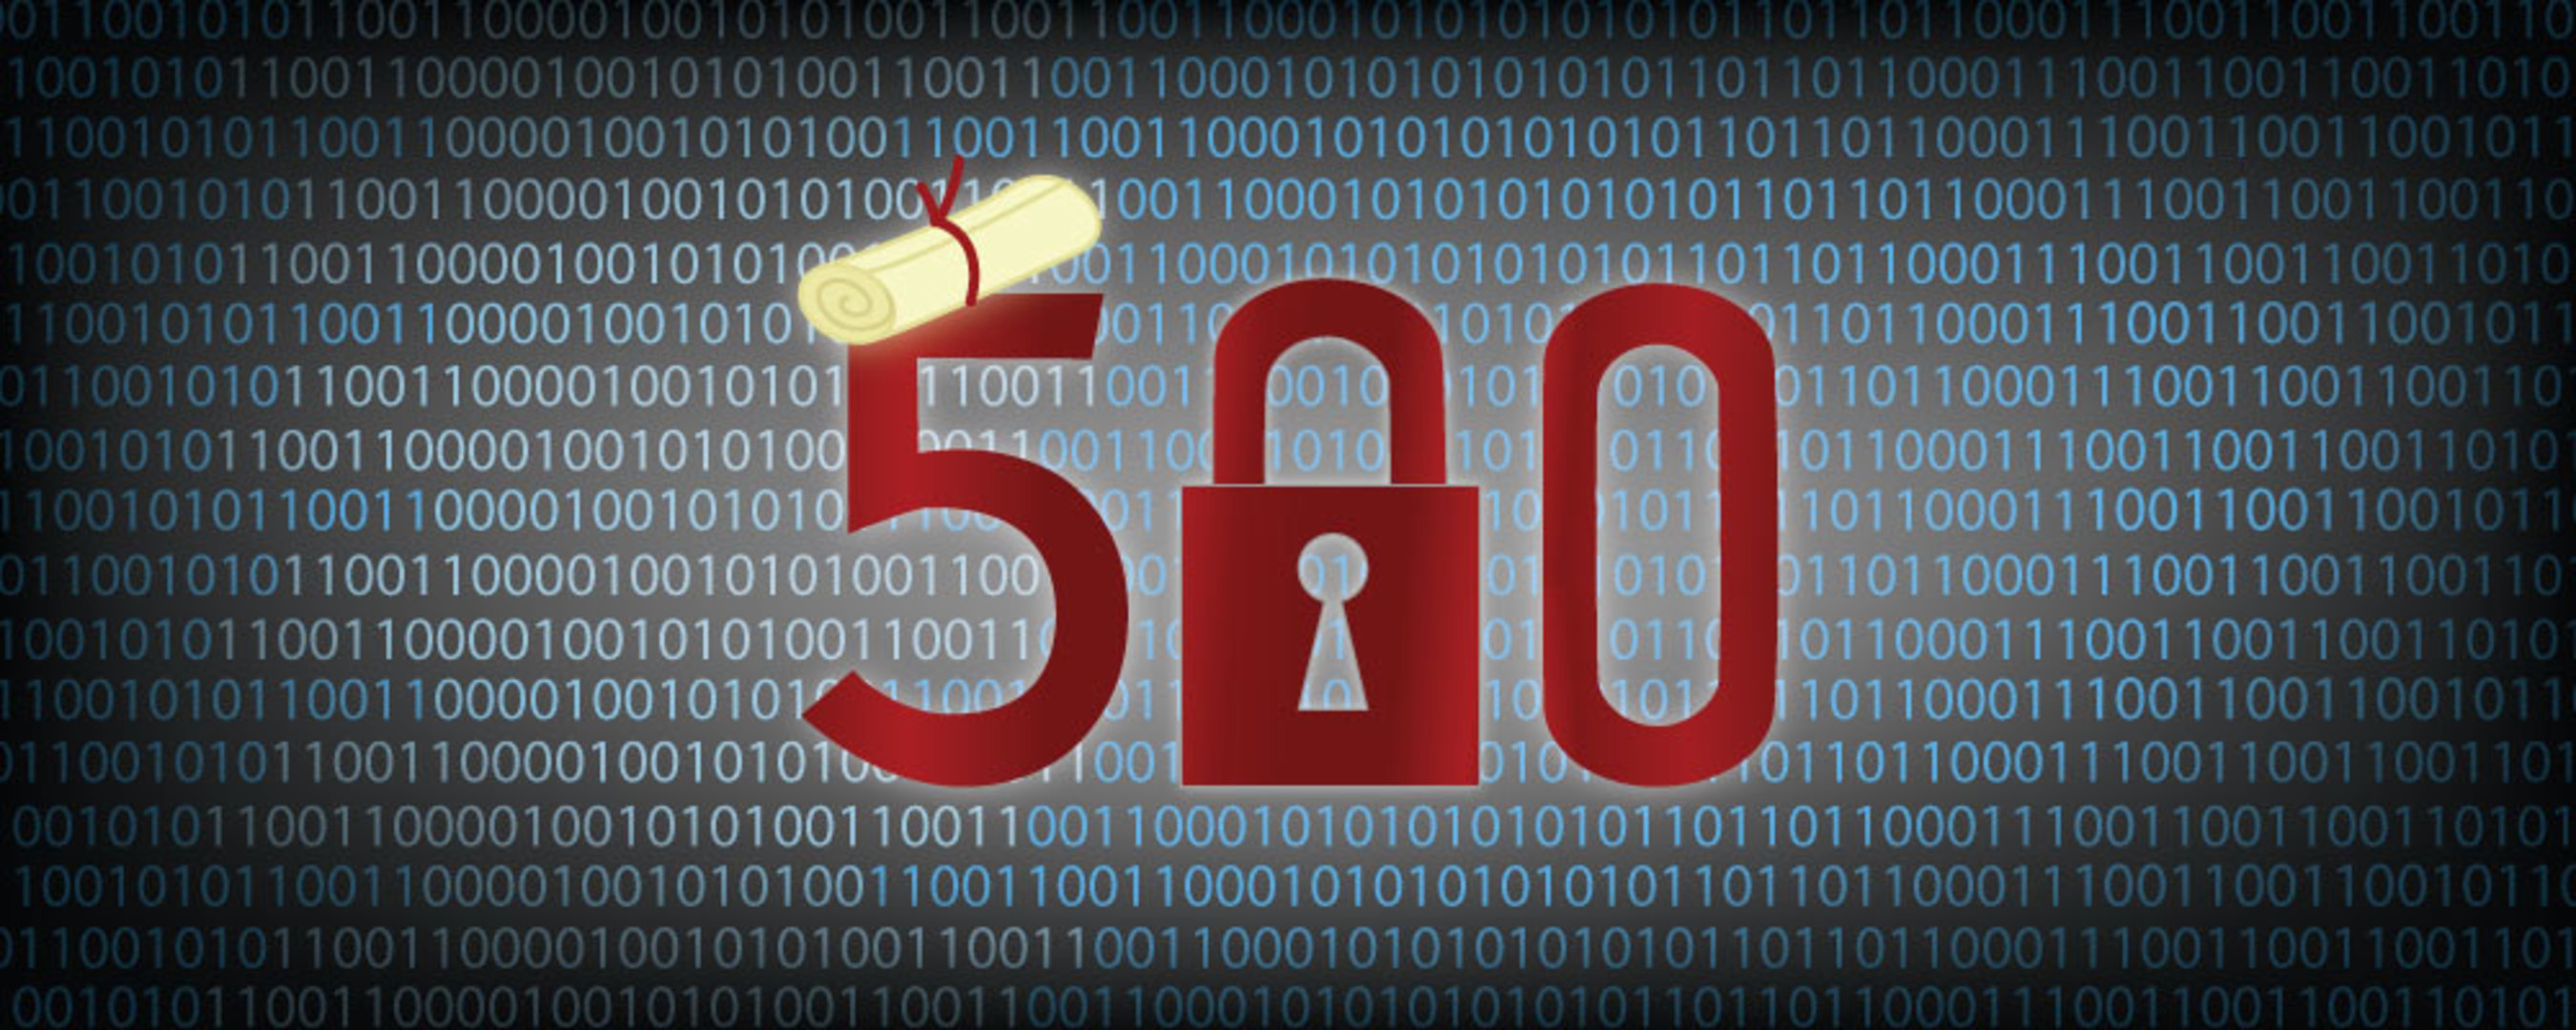 The Stanford Advanced Computer Security Certificate Program celebrates a milestone and impacting hundreds of cyber security professionals with online education.